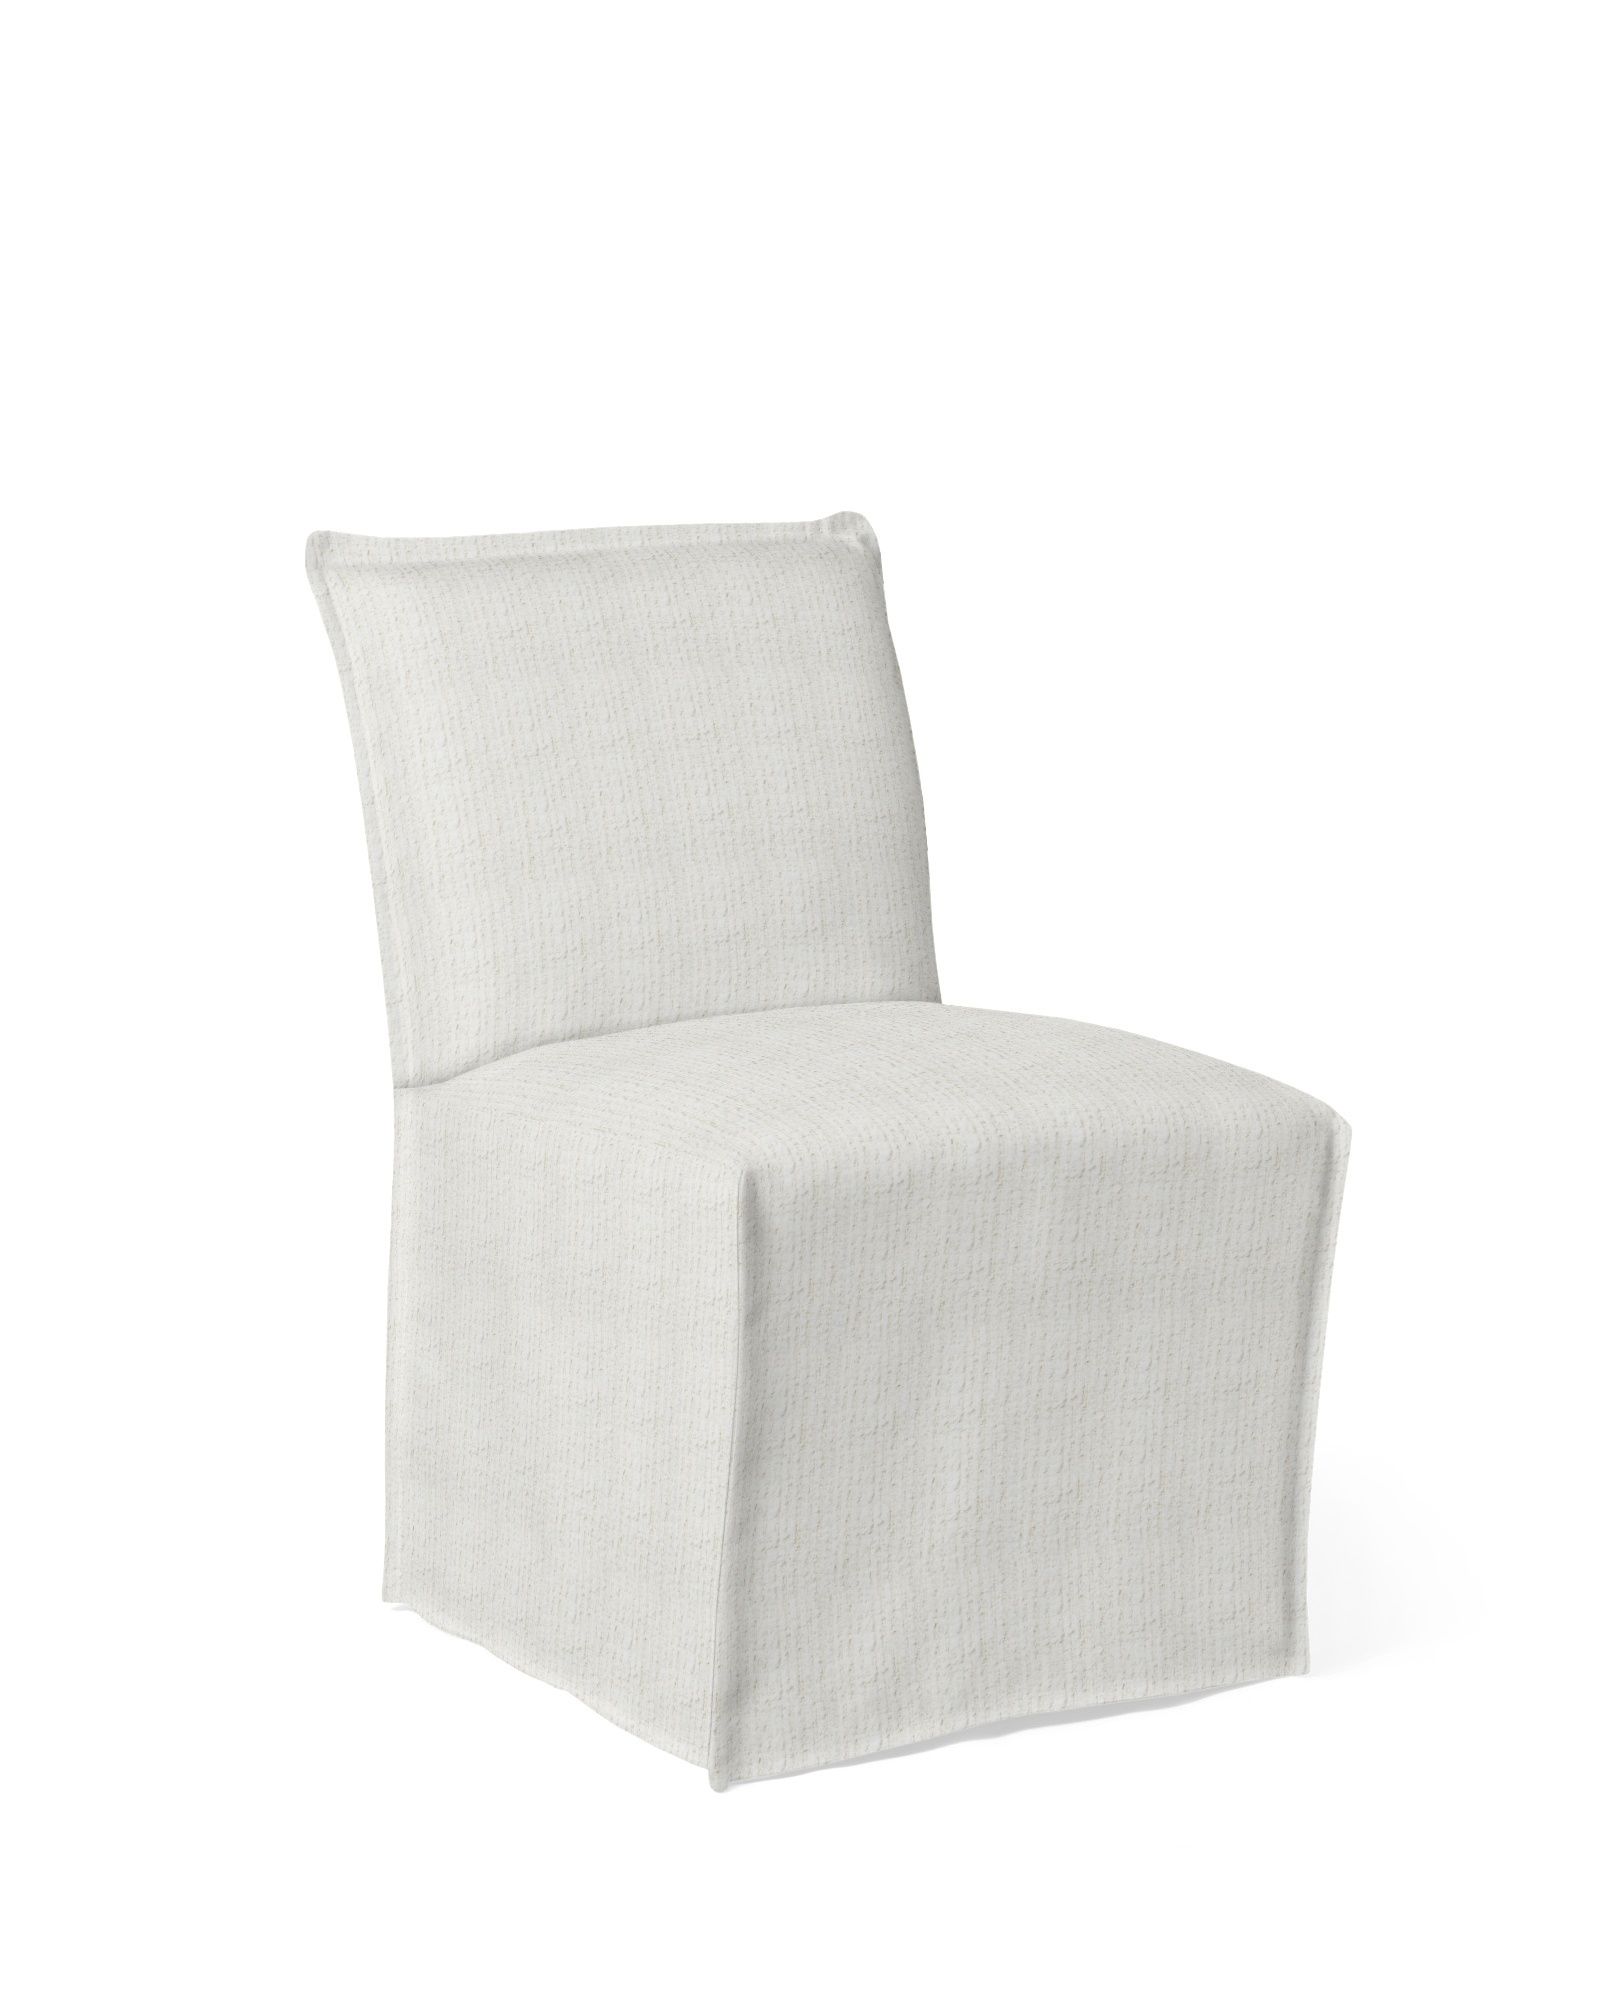 Sundial Outdoor Side Chair - Slipcovered | Serena and Lily